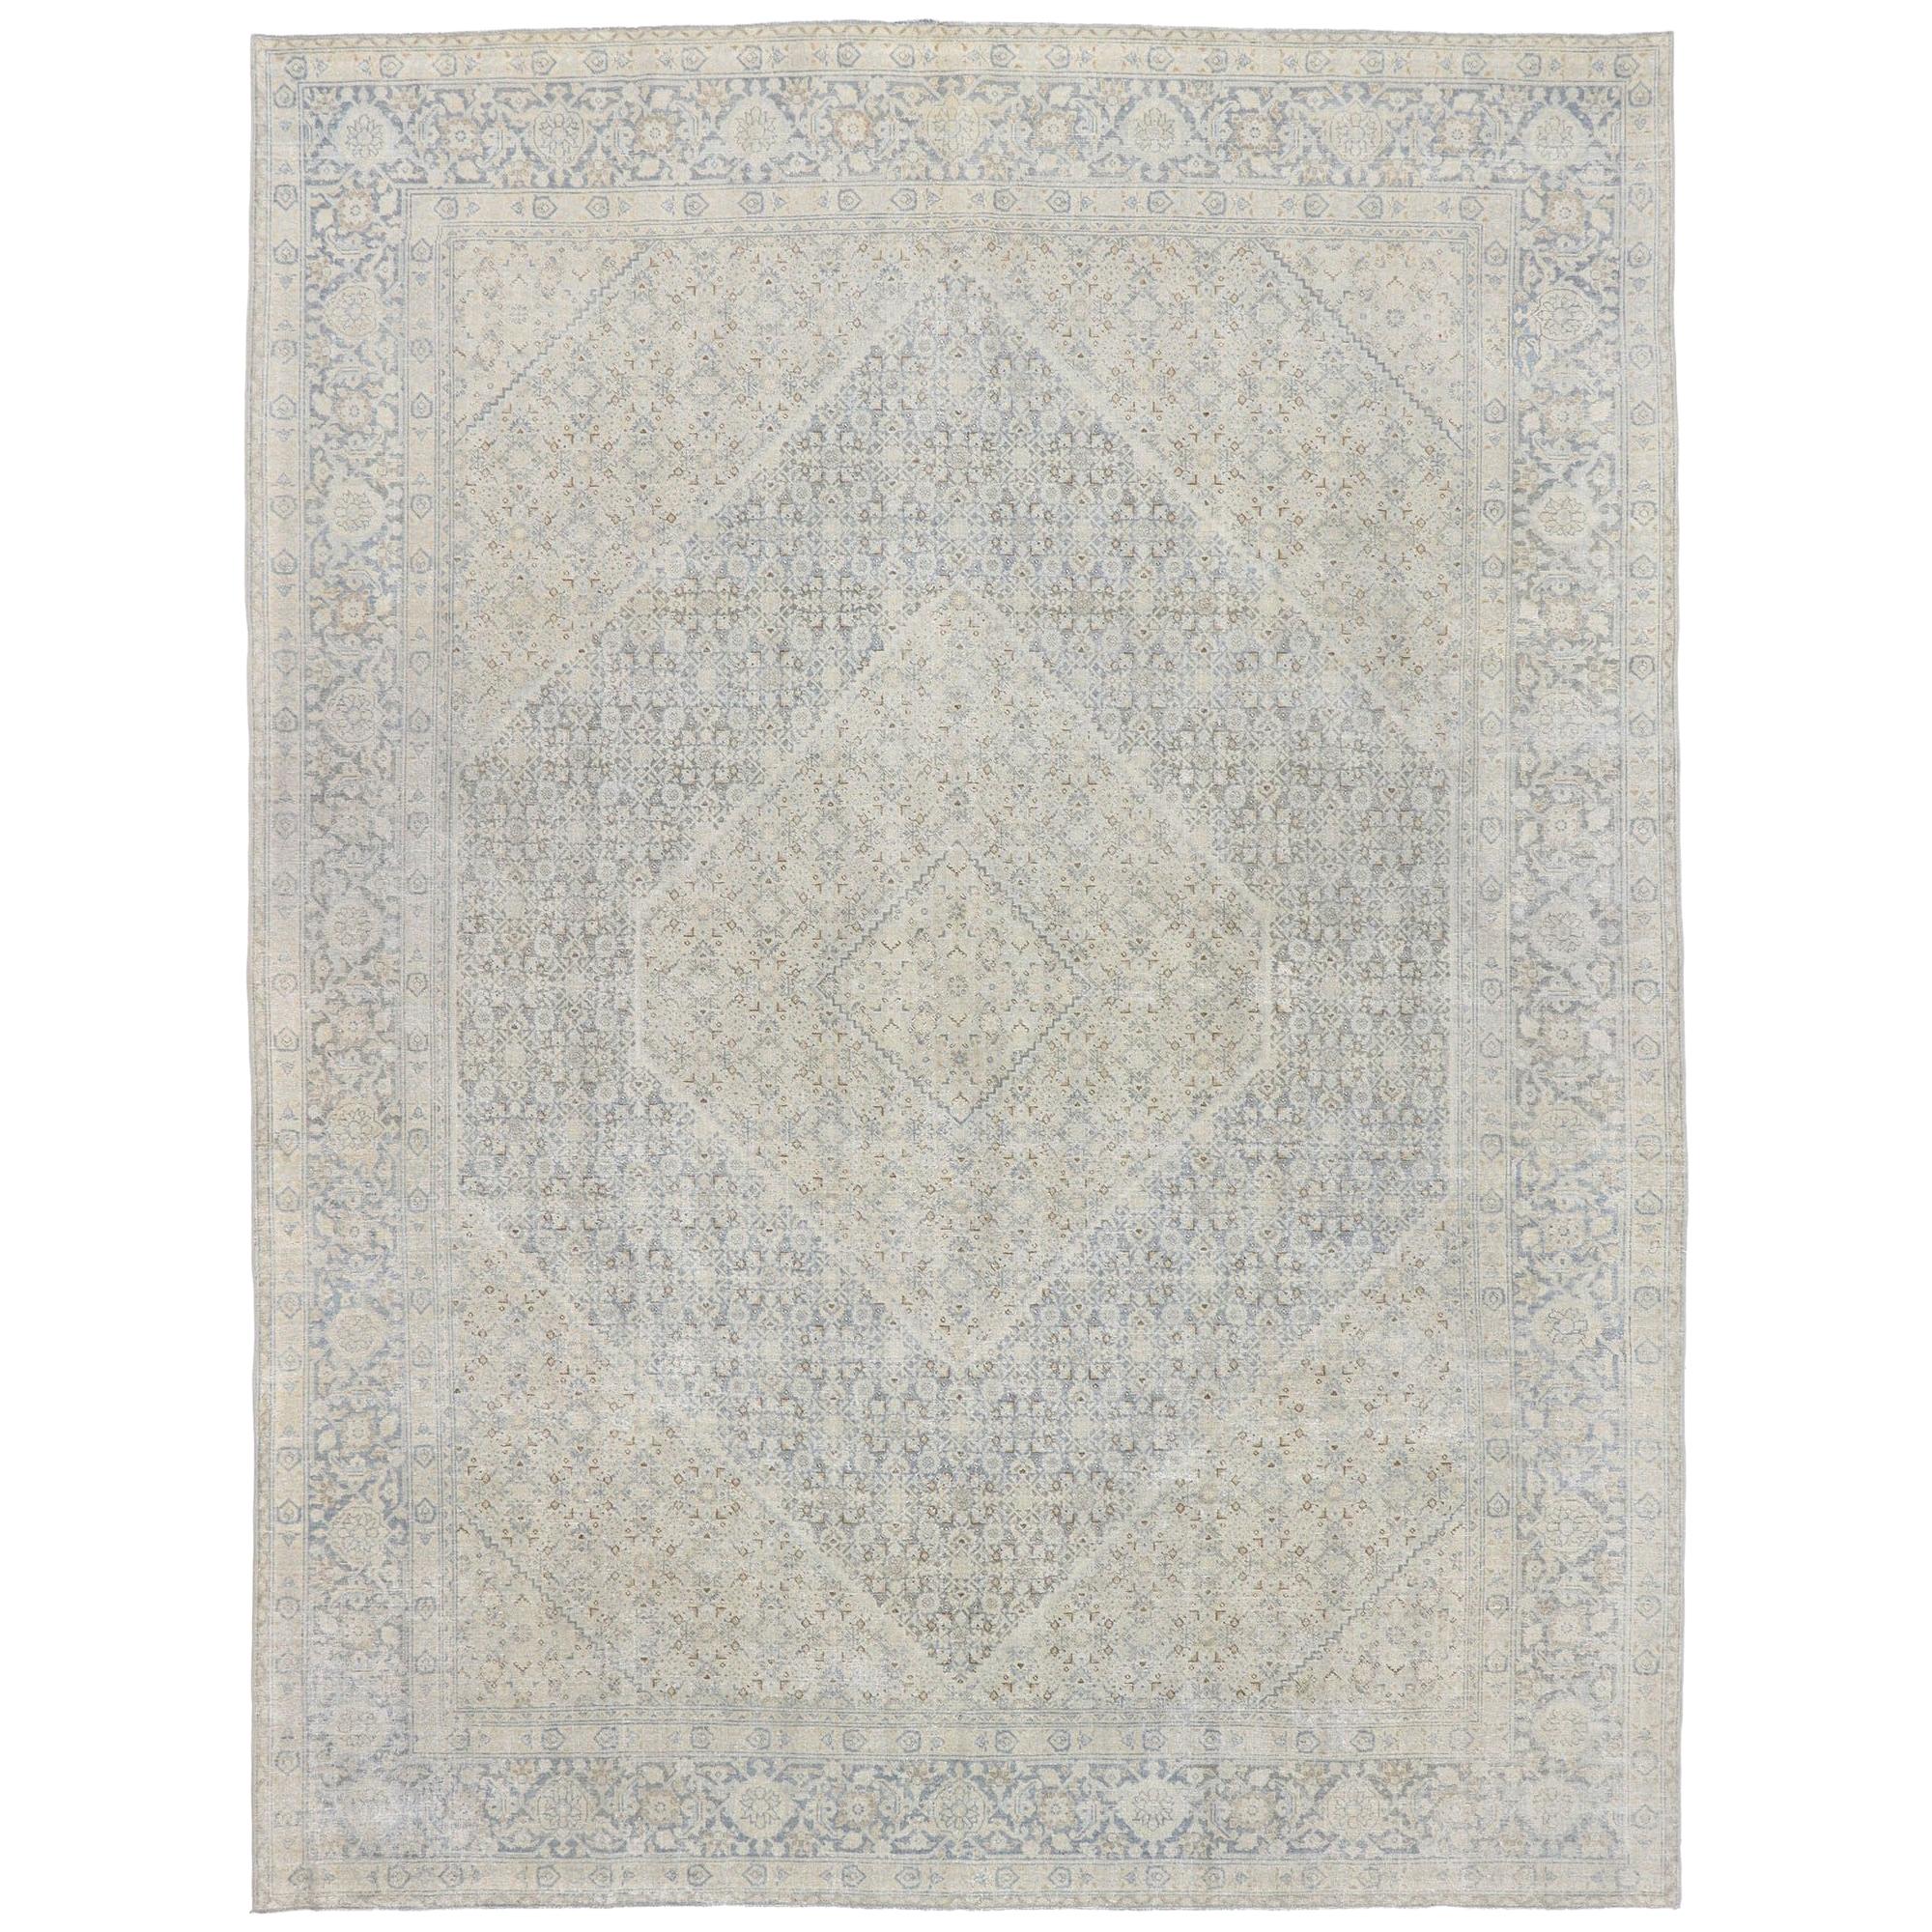 Distressed Vintage Persian Mahi Tabriz Rug with English Country Cottage Style